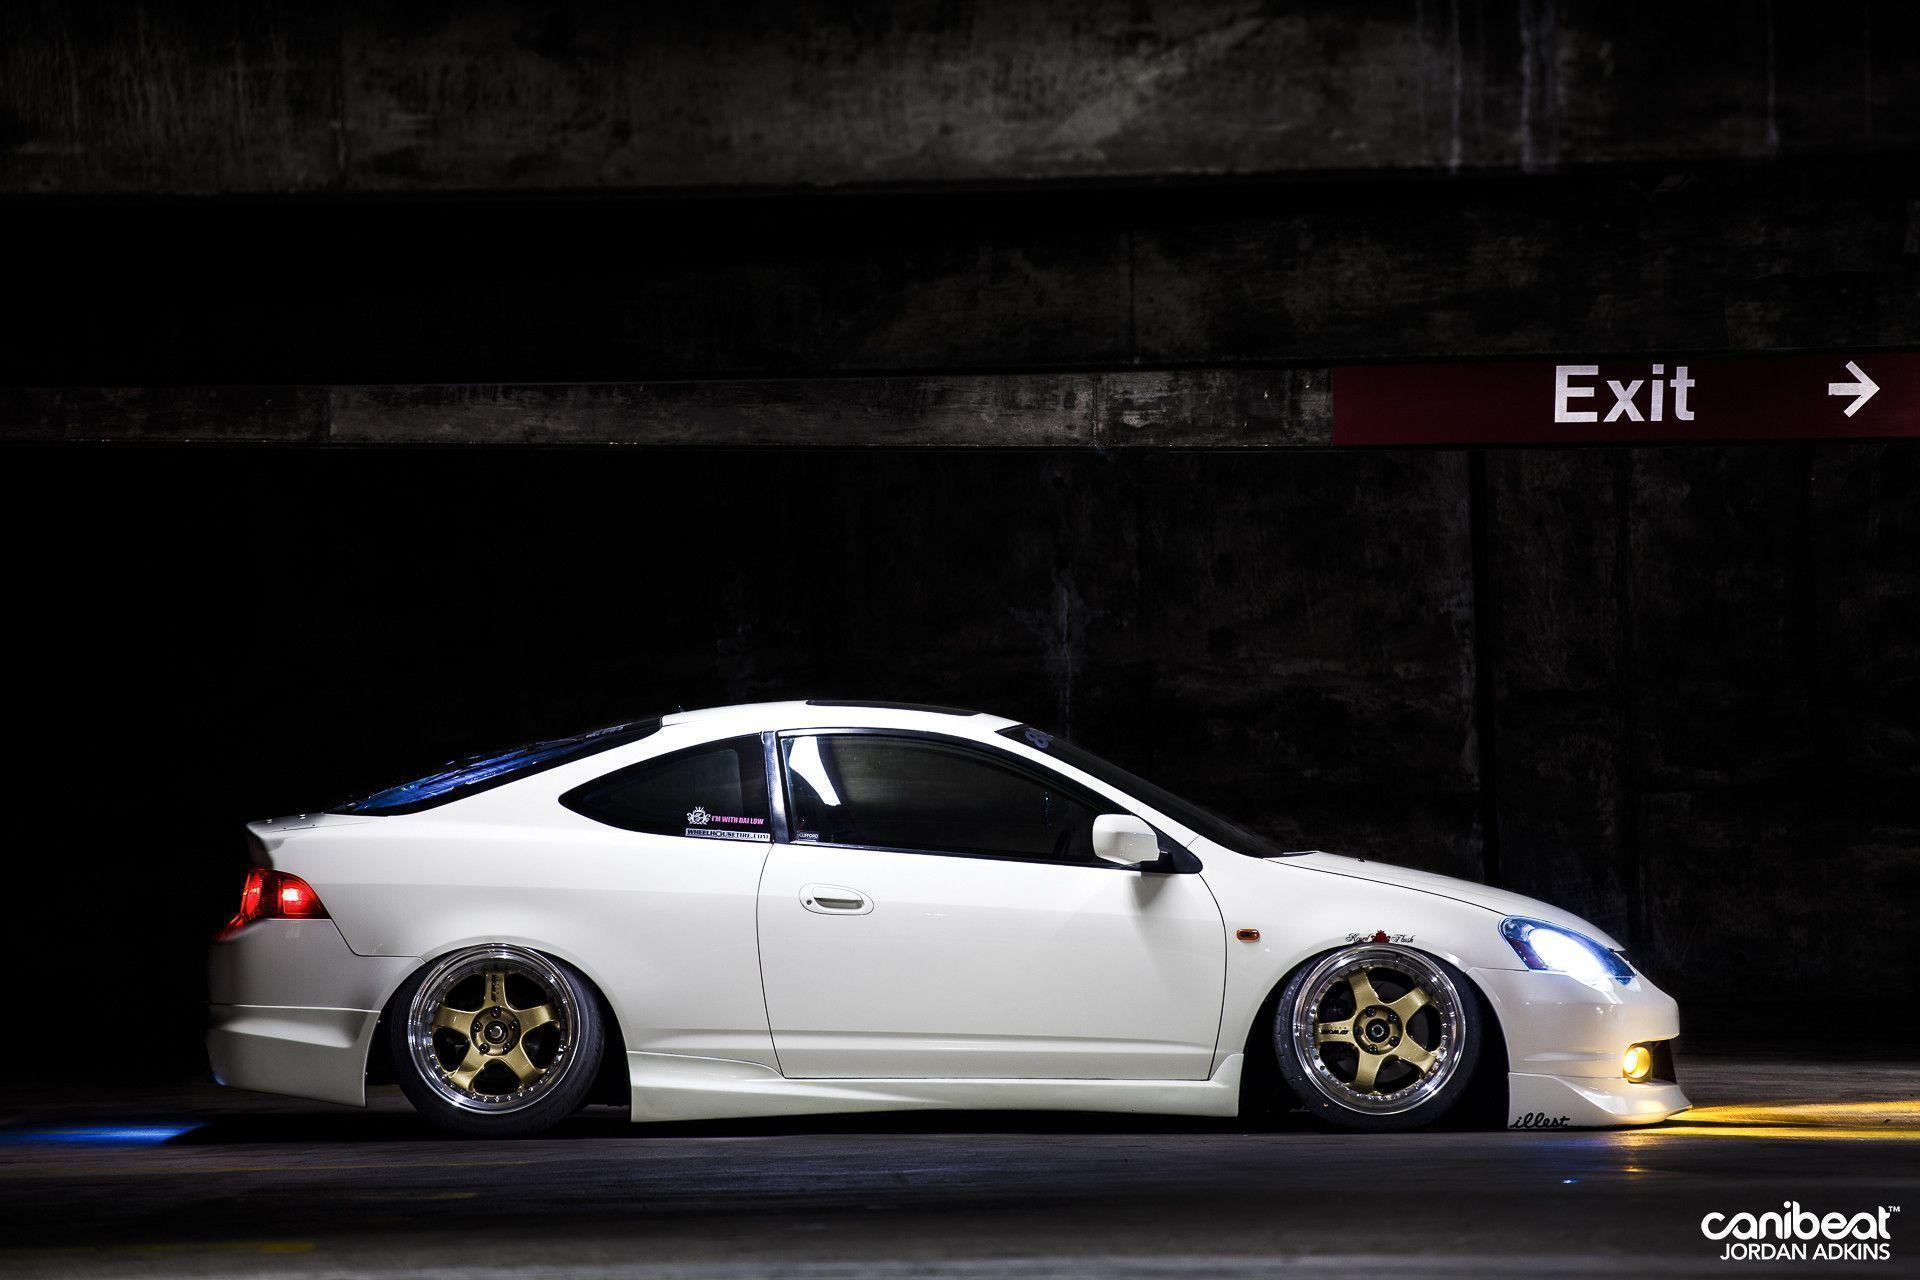 Wallpaper Wednesday: Jerald Yutadco&;s Bagged Acura RSX